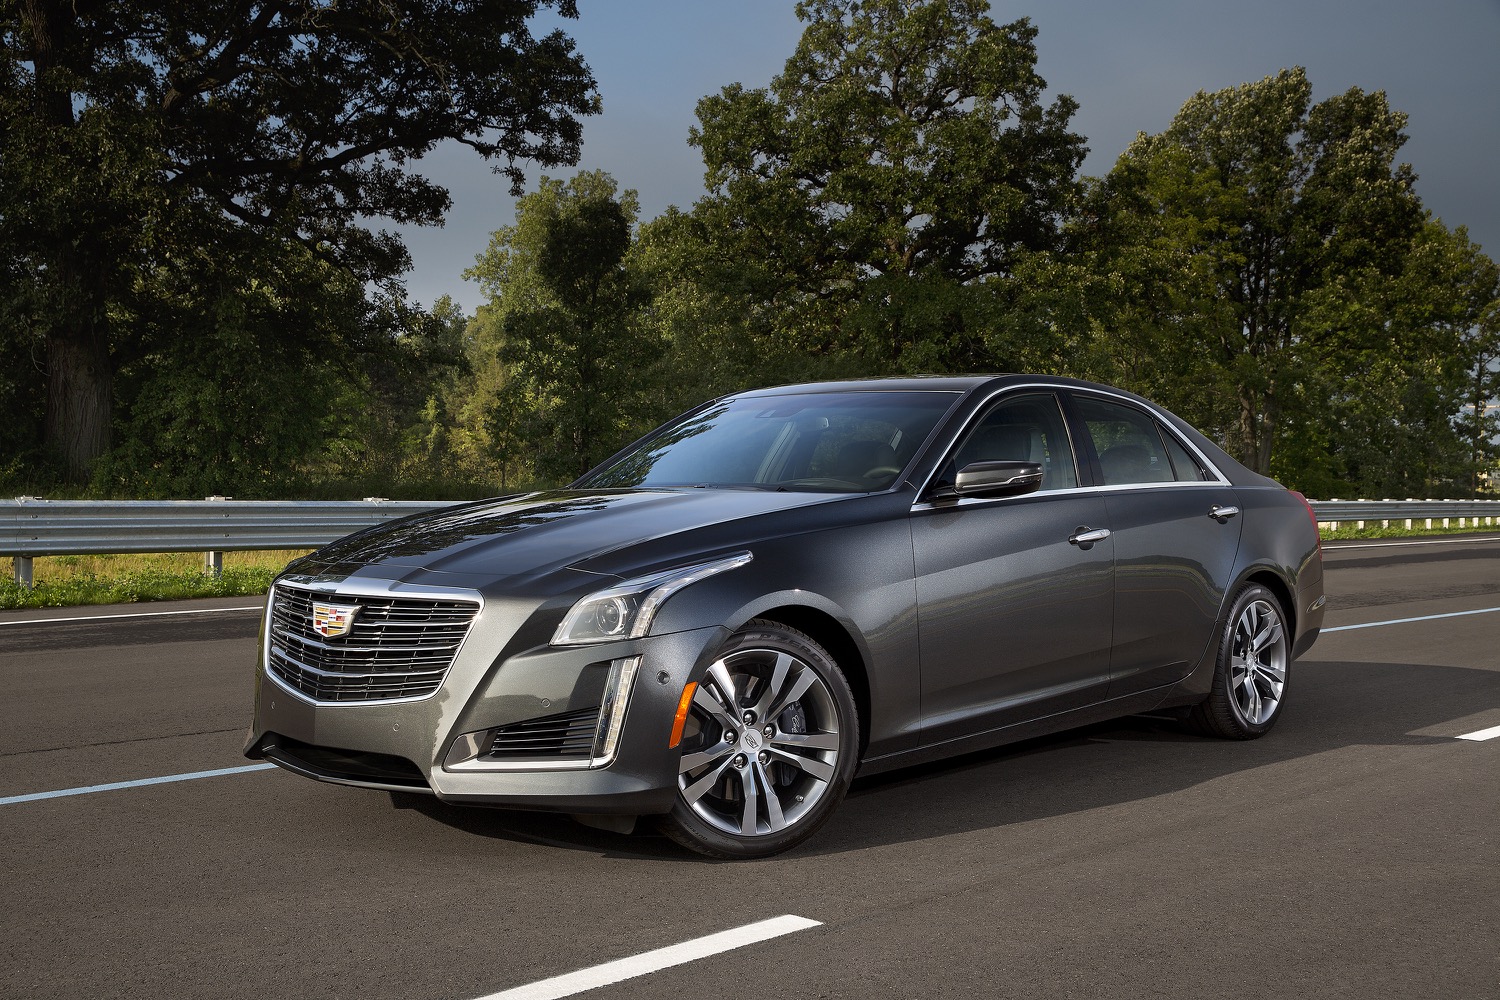 2016 Cadillac CTS Sedan Info, Specs, Pictures, Wiki | GM Authority